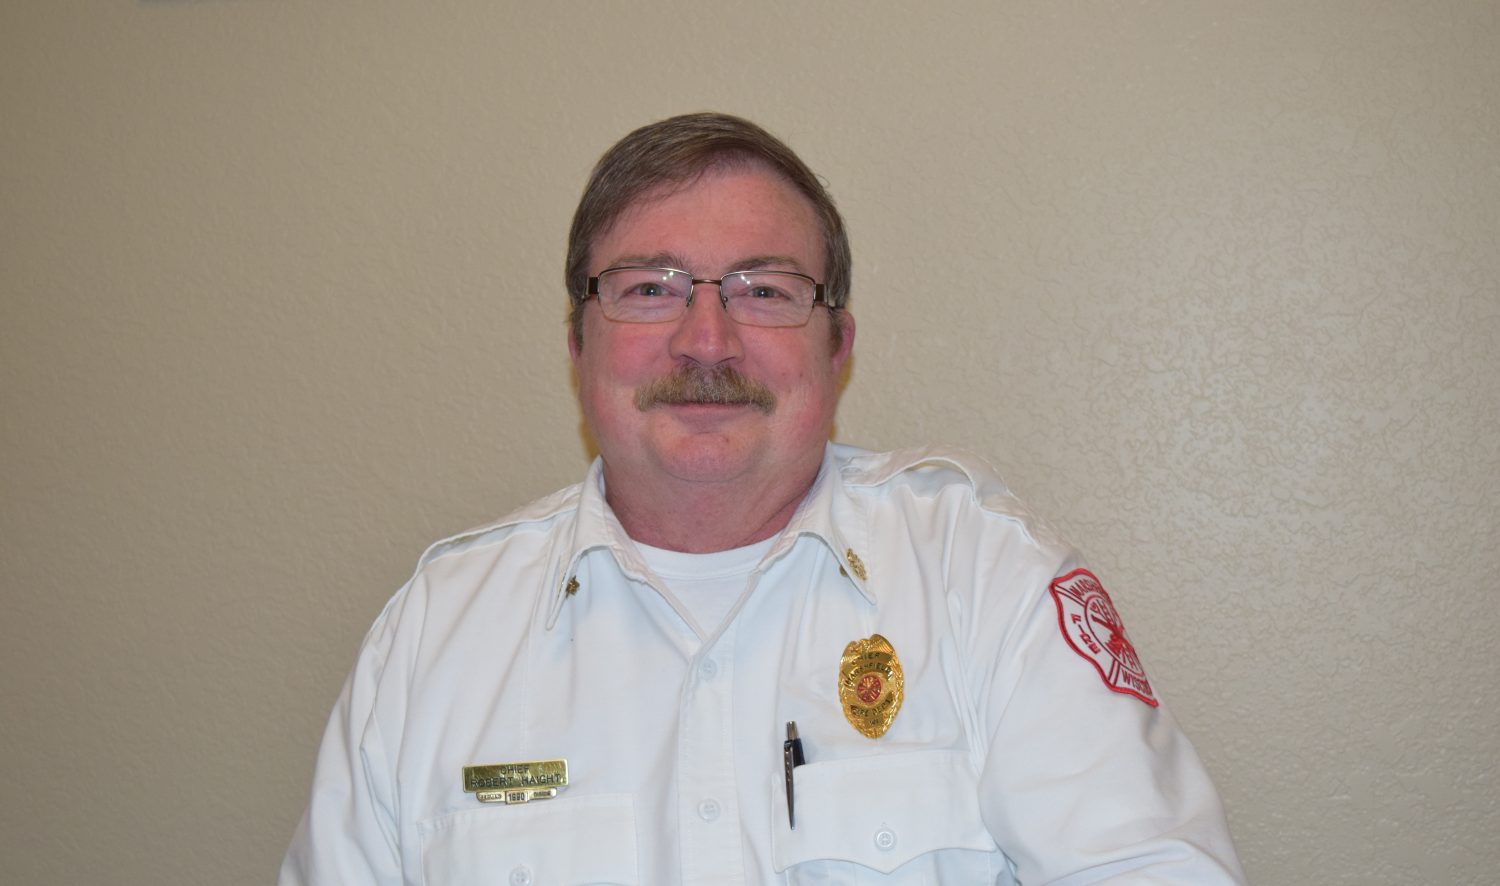 Chief Bob Haight began his career with the Marshfield Fire & Rescue Department in 1987.